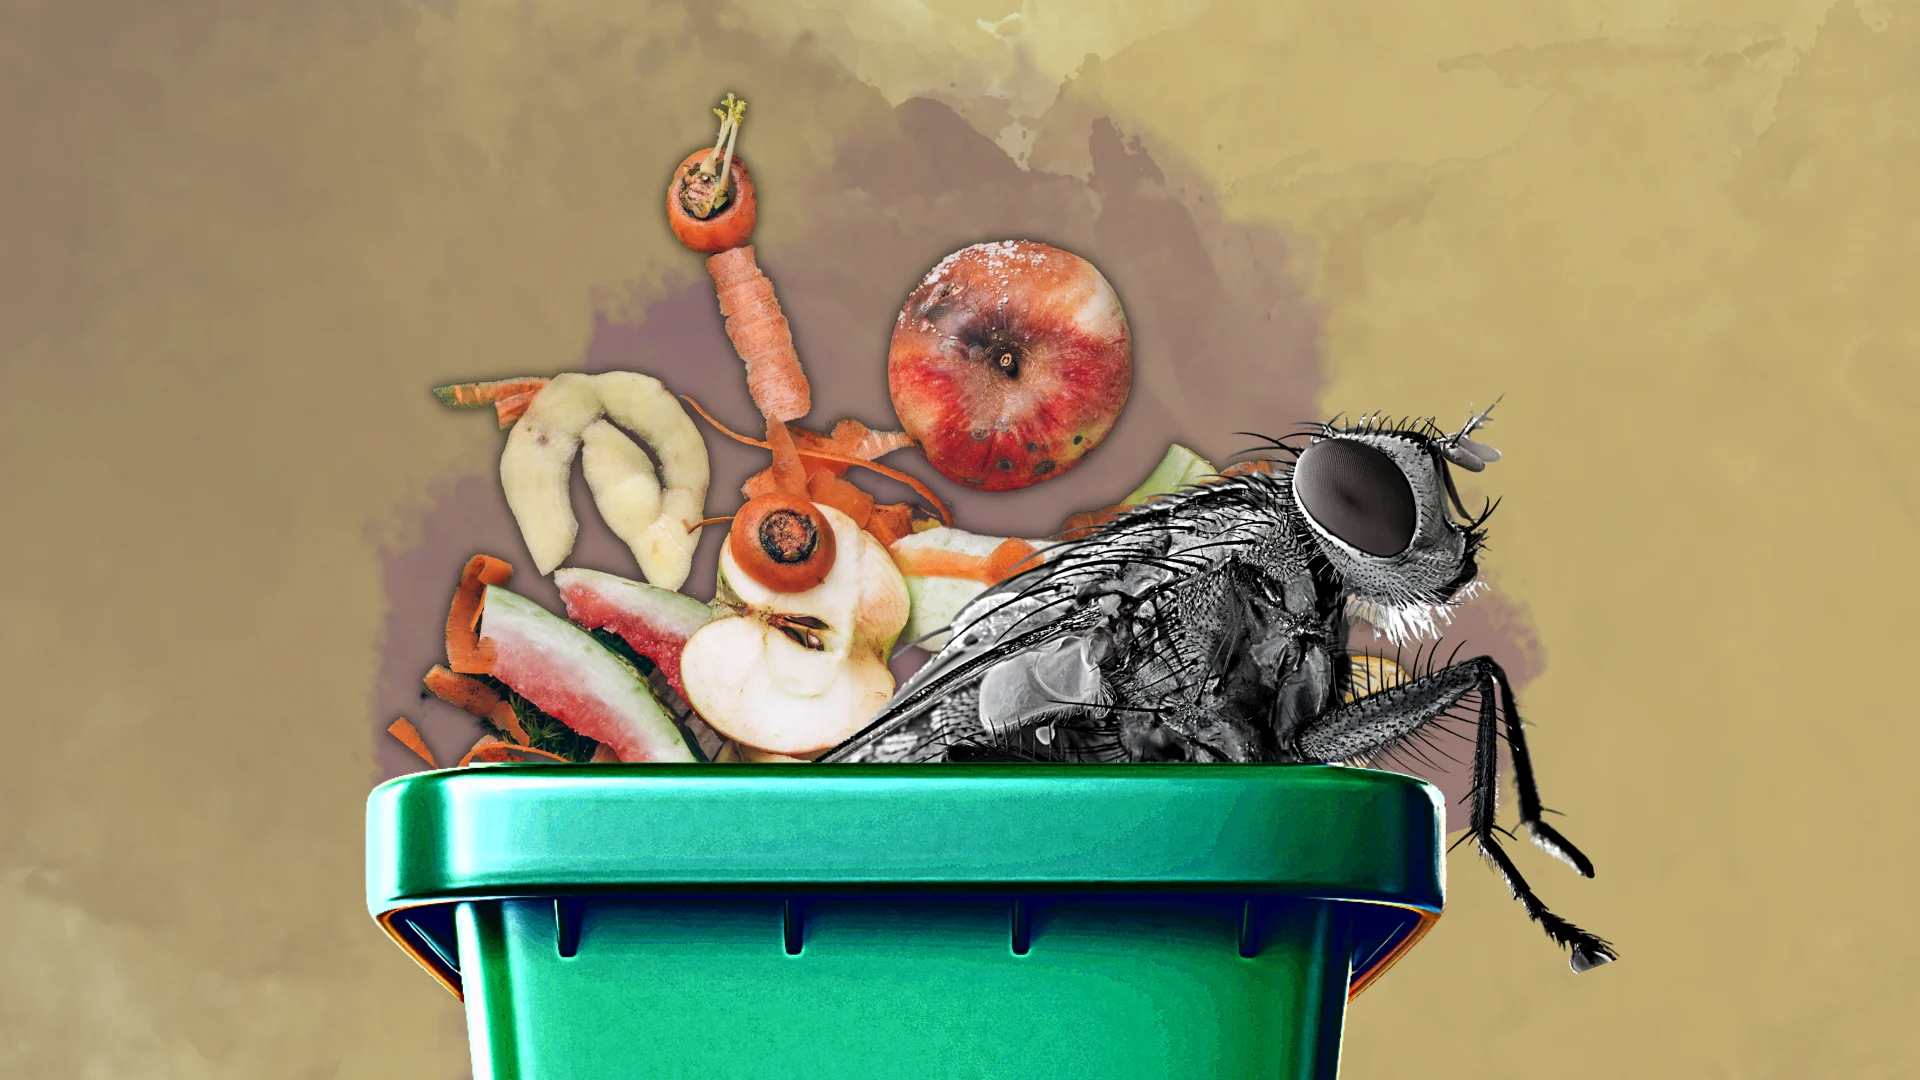 Prevent maggots from overtaking your green bin with these game-changing tips